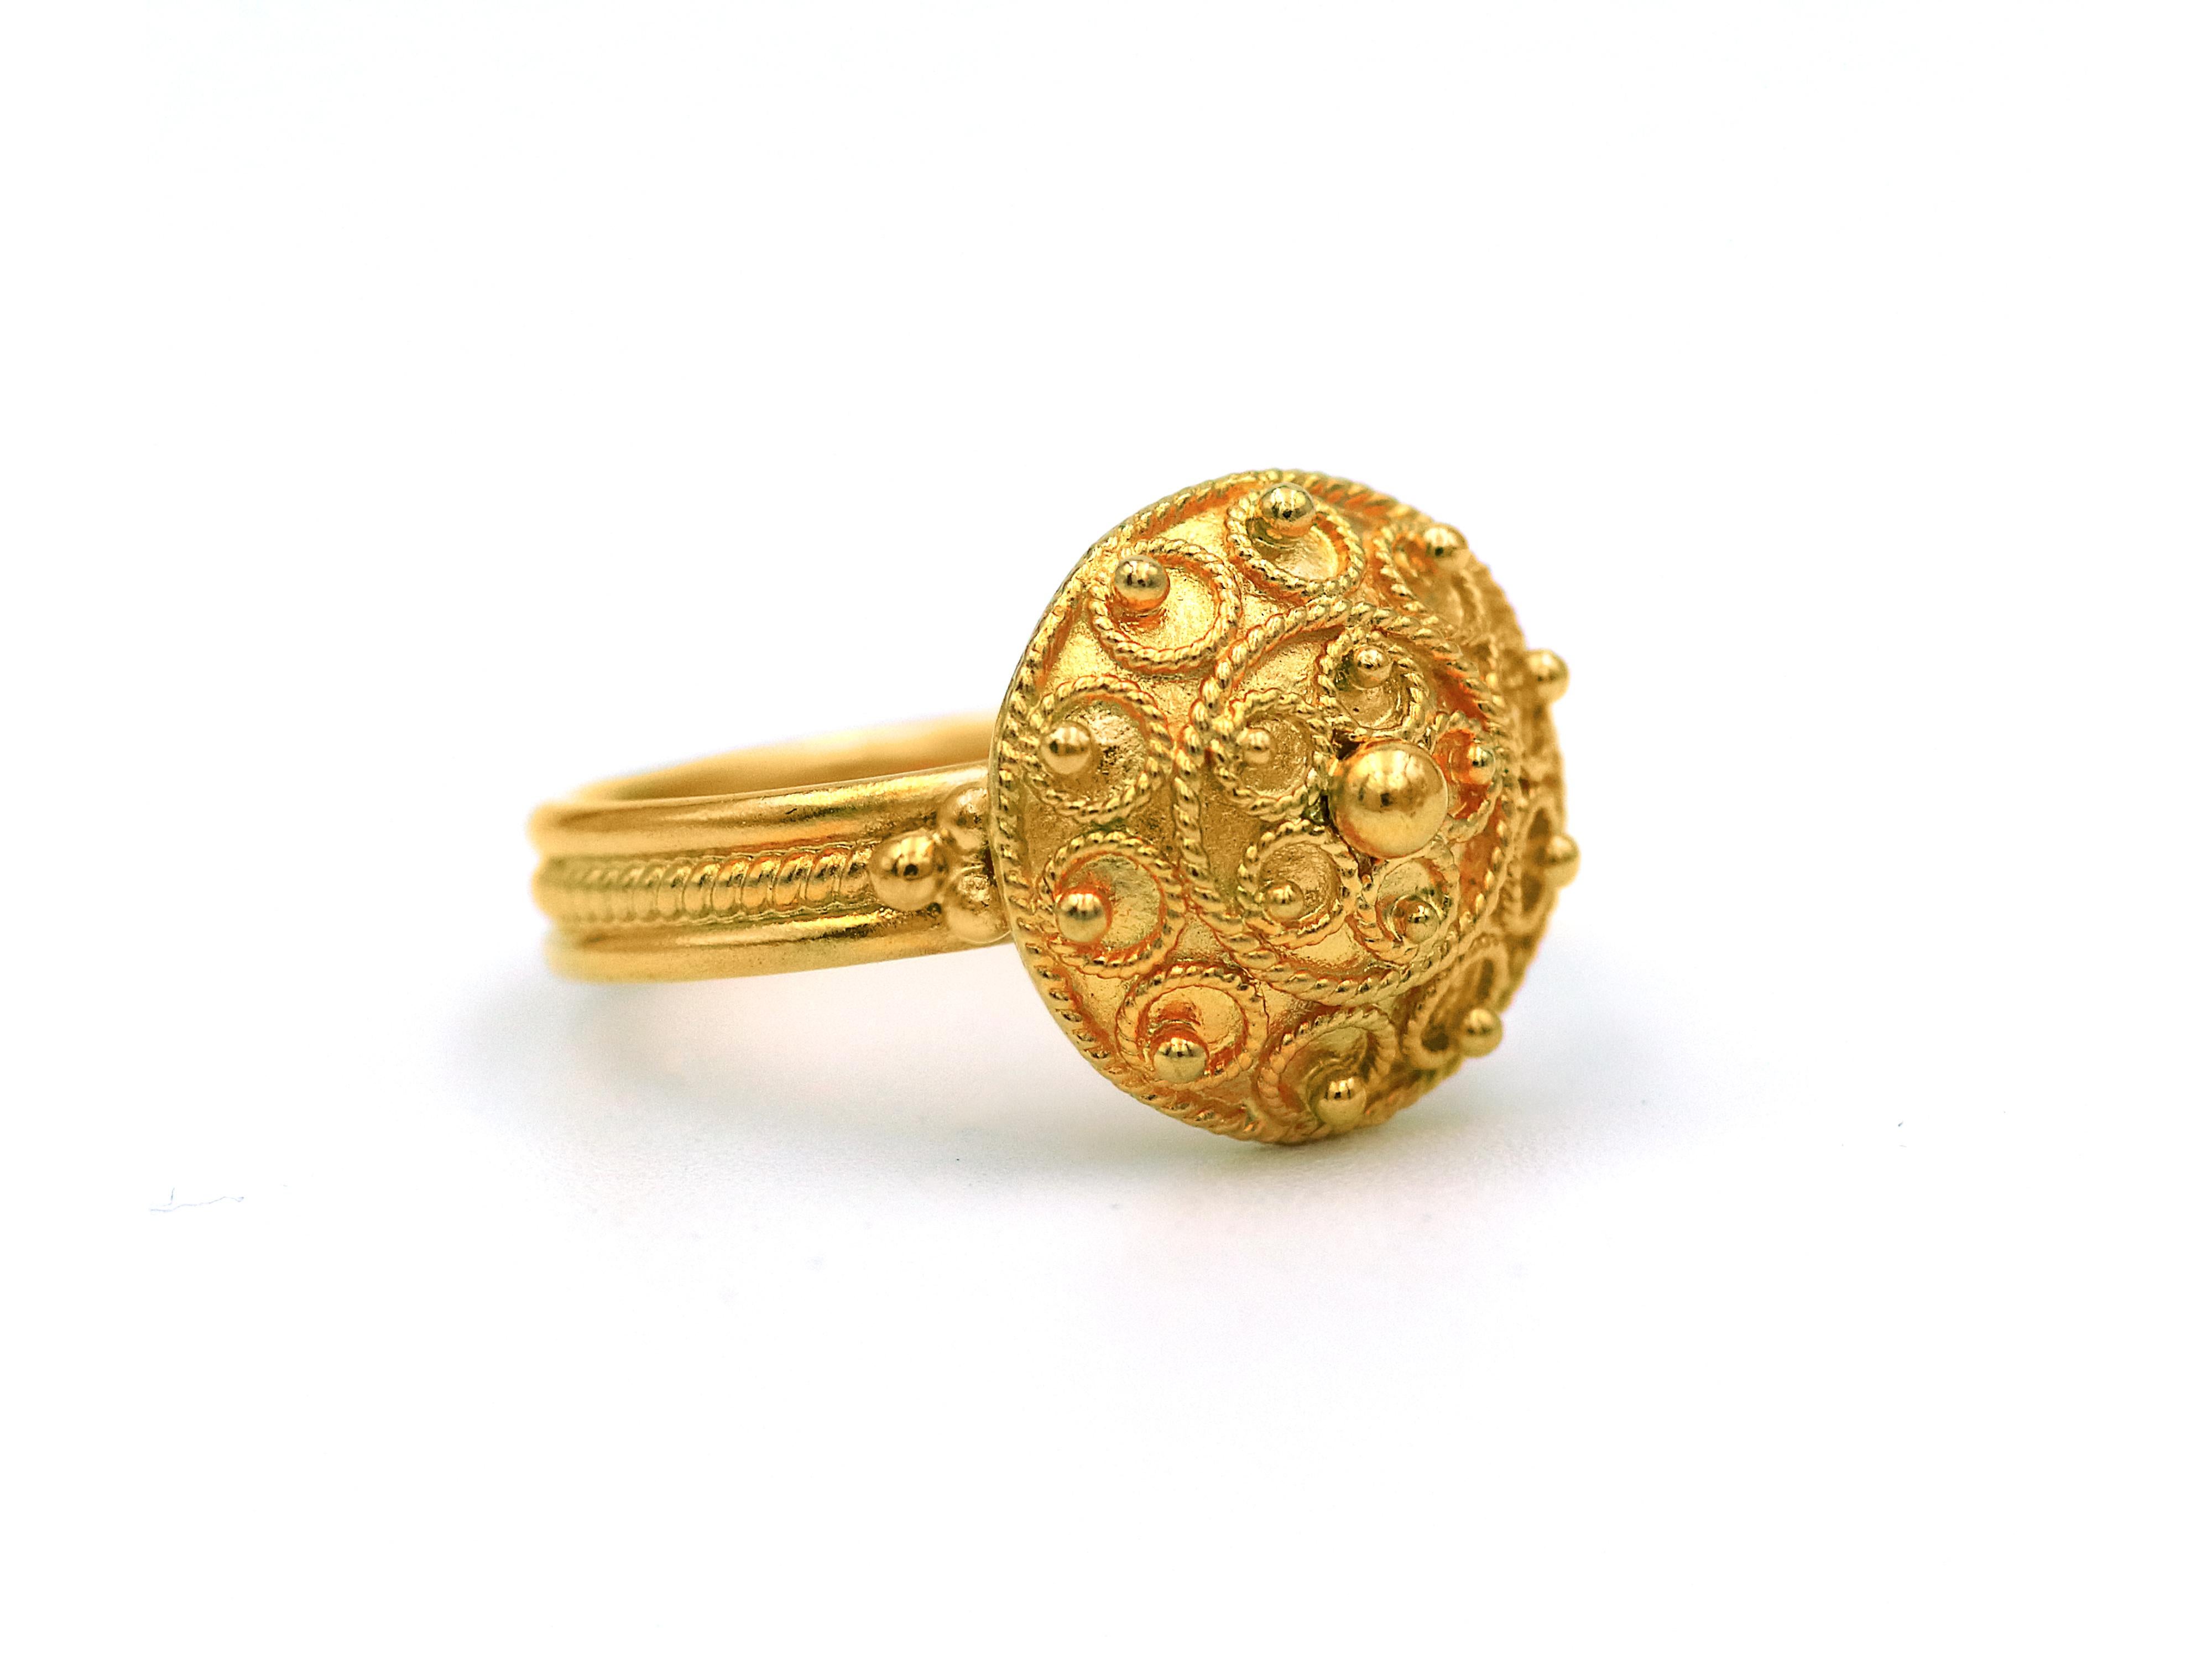 Bocola design ring set in 22k yellow gold with circles of filigree and granulations of different size all around that half round ring. Each side ties the upper and bottom part with three granulations creating a pyramid and the band also with